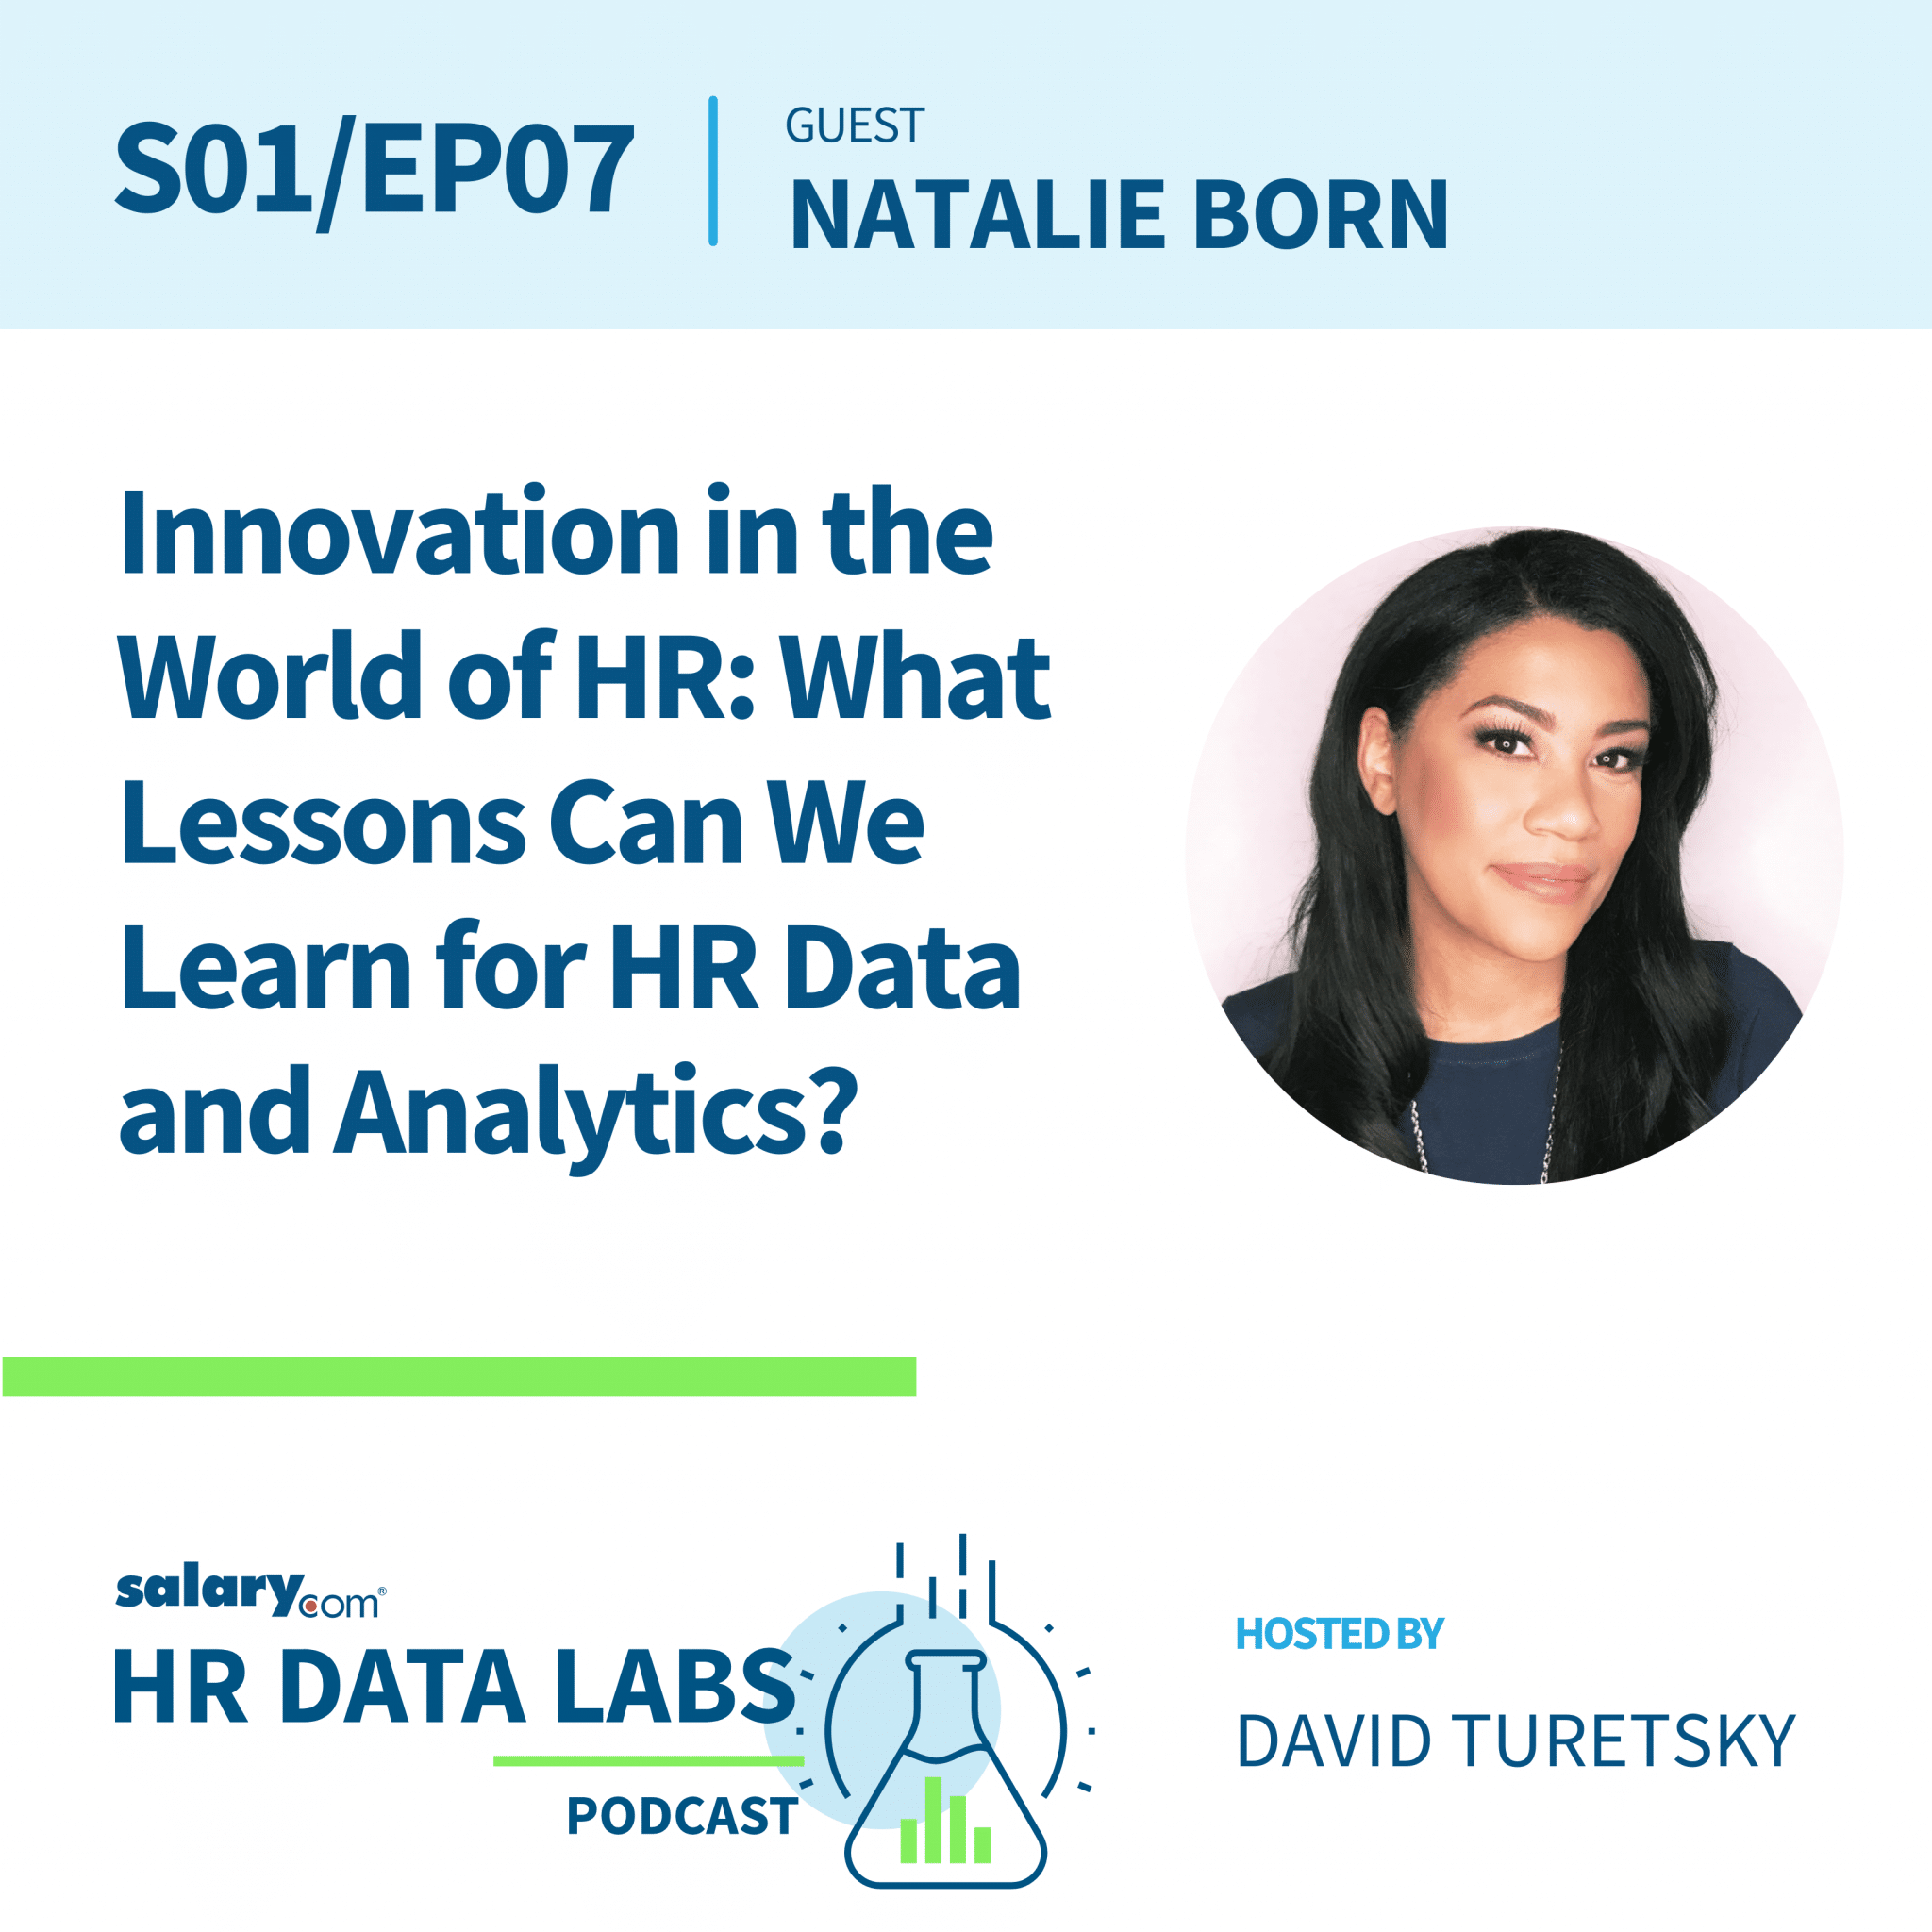 Innovation in the World of HR: What Lessons can we Learn for HR Data and Analytics?